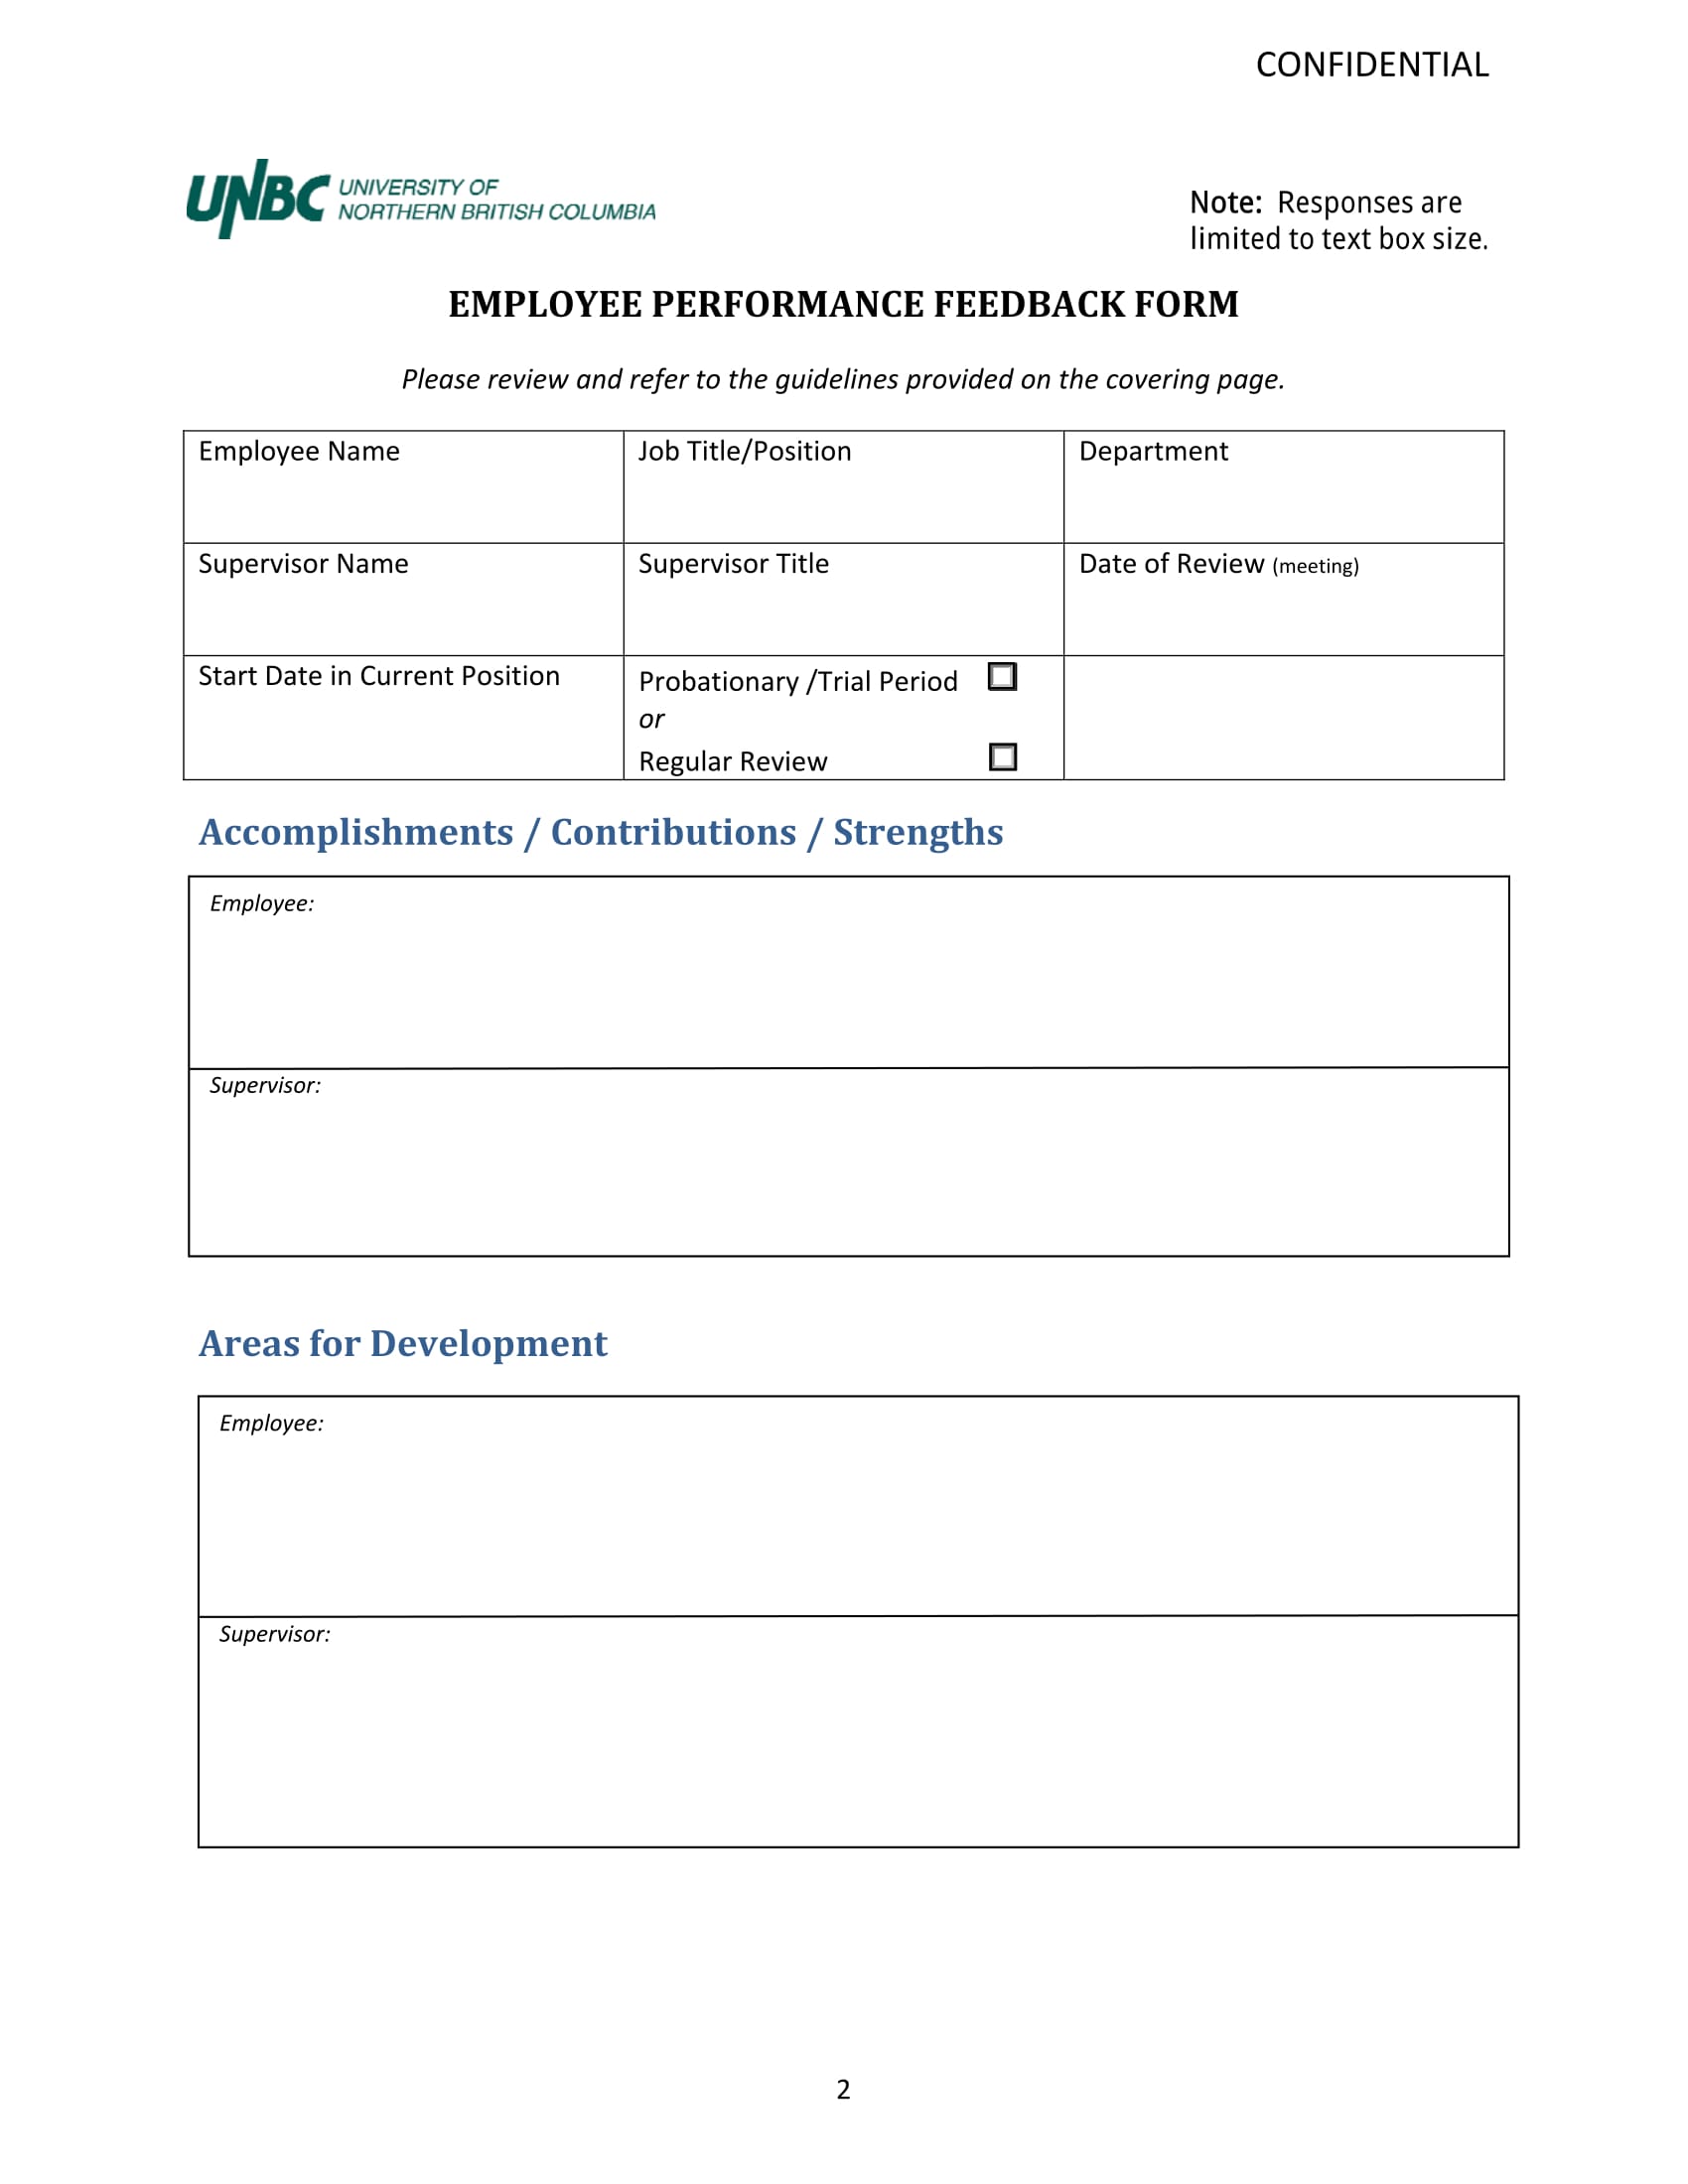 employee performance feedback review form 2